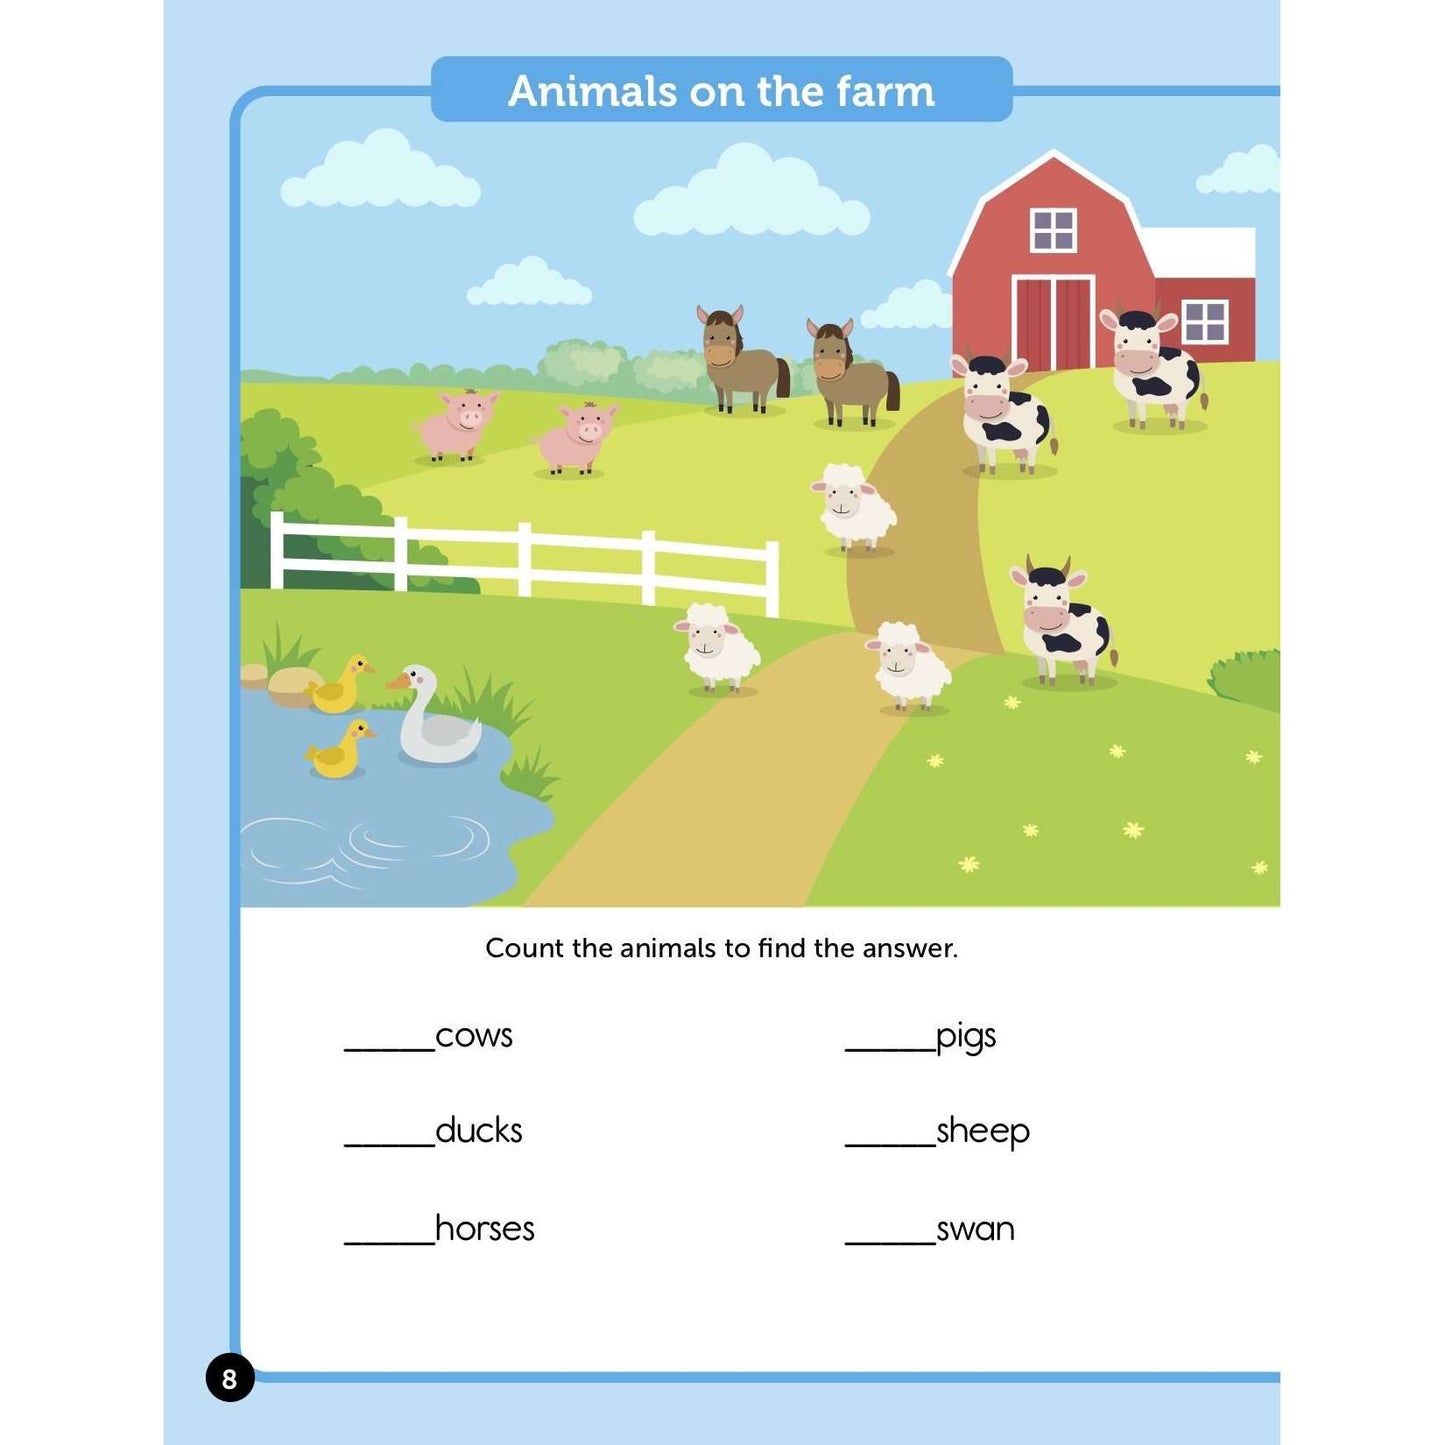 Learn About Numbers Activity Book:Primary Classroom Resources